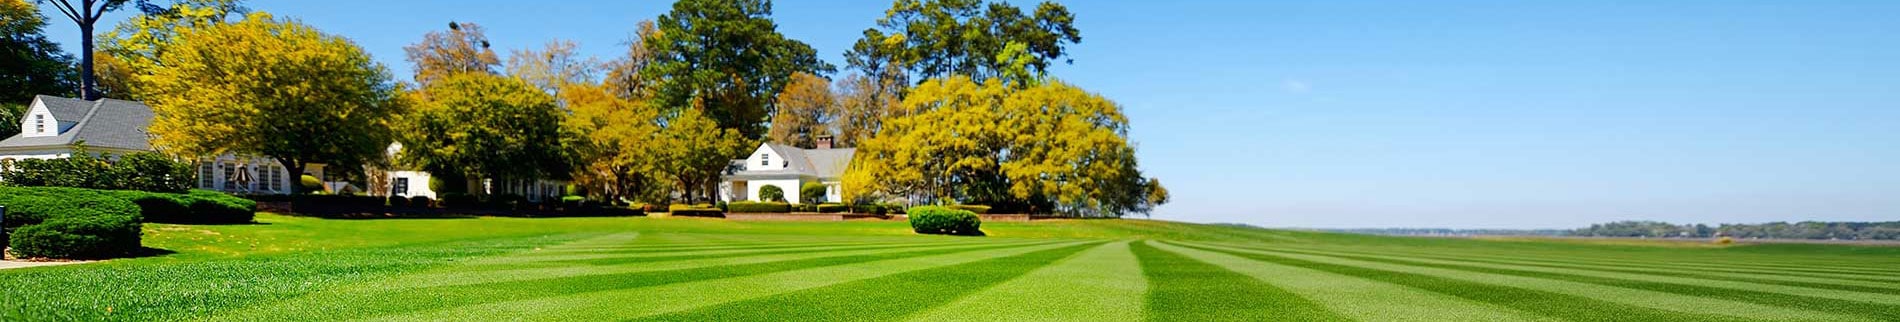 Lawn Care for Northborough, MA